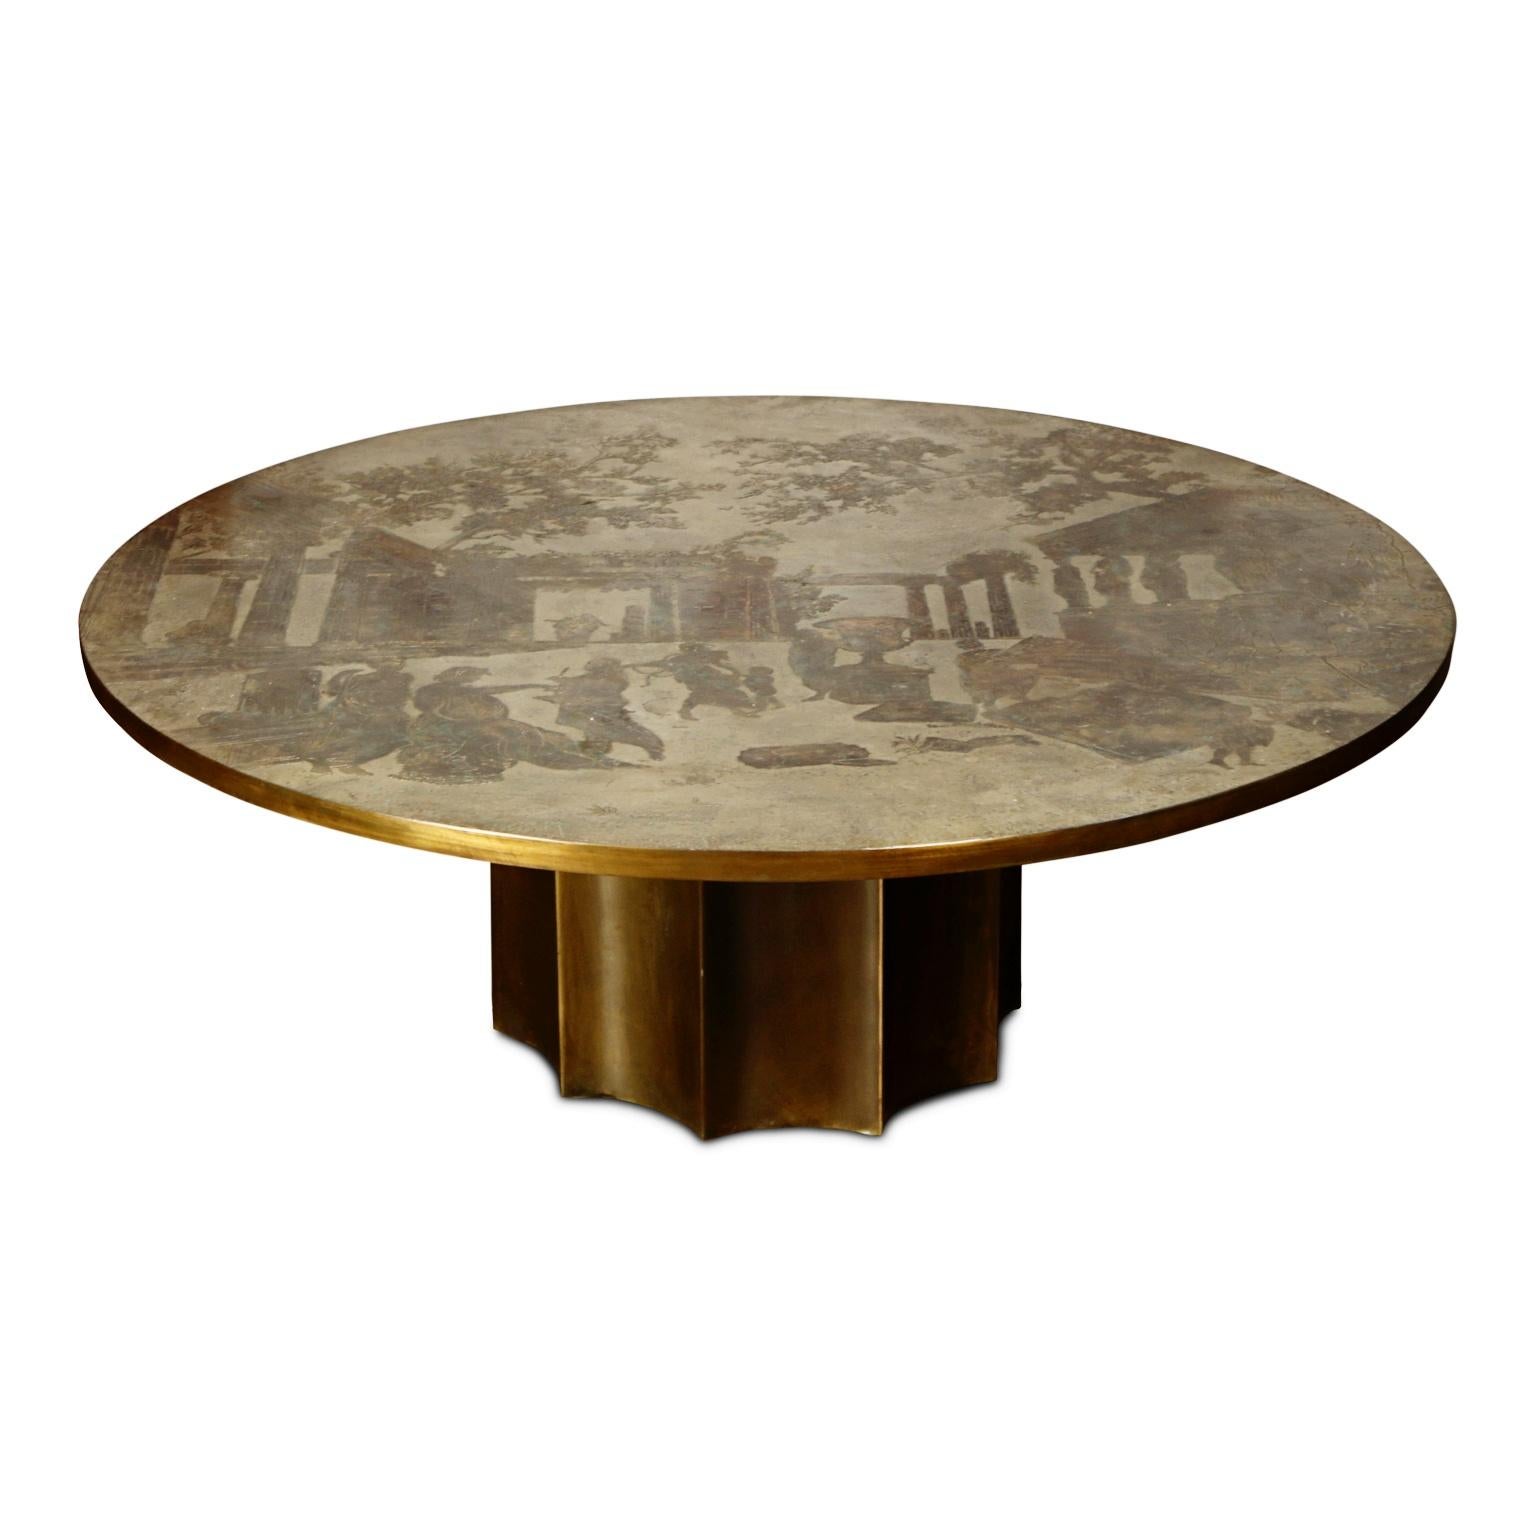 This is a rare and large 47.25 inch Odyssey cocktail table by father and son team, Philip and Kelvin LaVerne, produced in the 1960s. Ingeniously designed with acid etching and patinated polychrome bronze and pewter, this circular coffee table